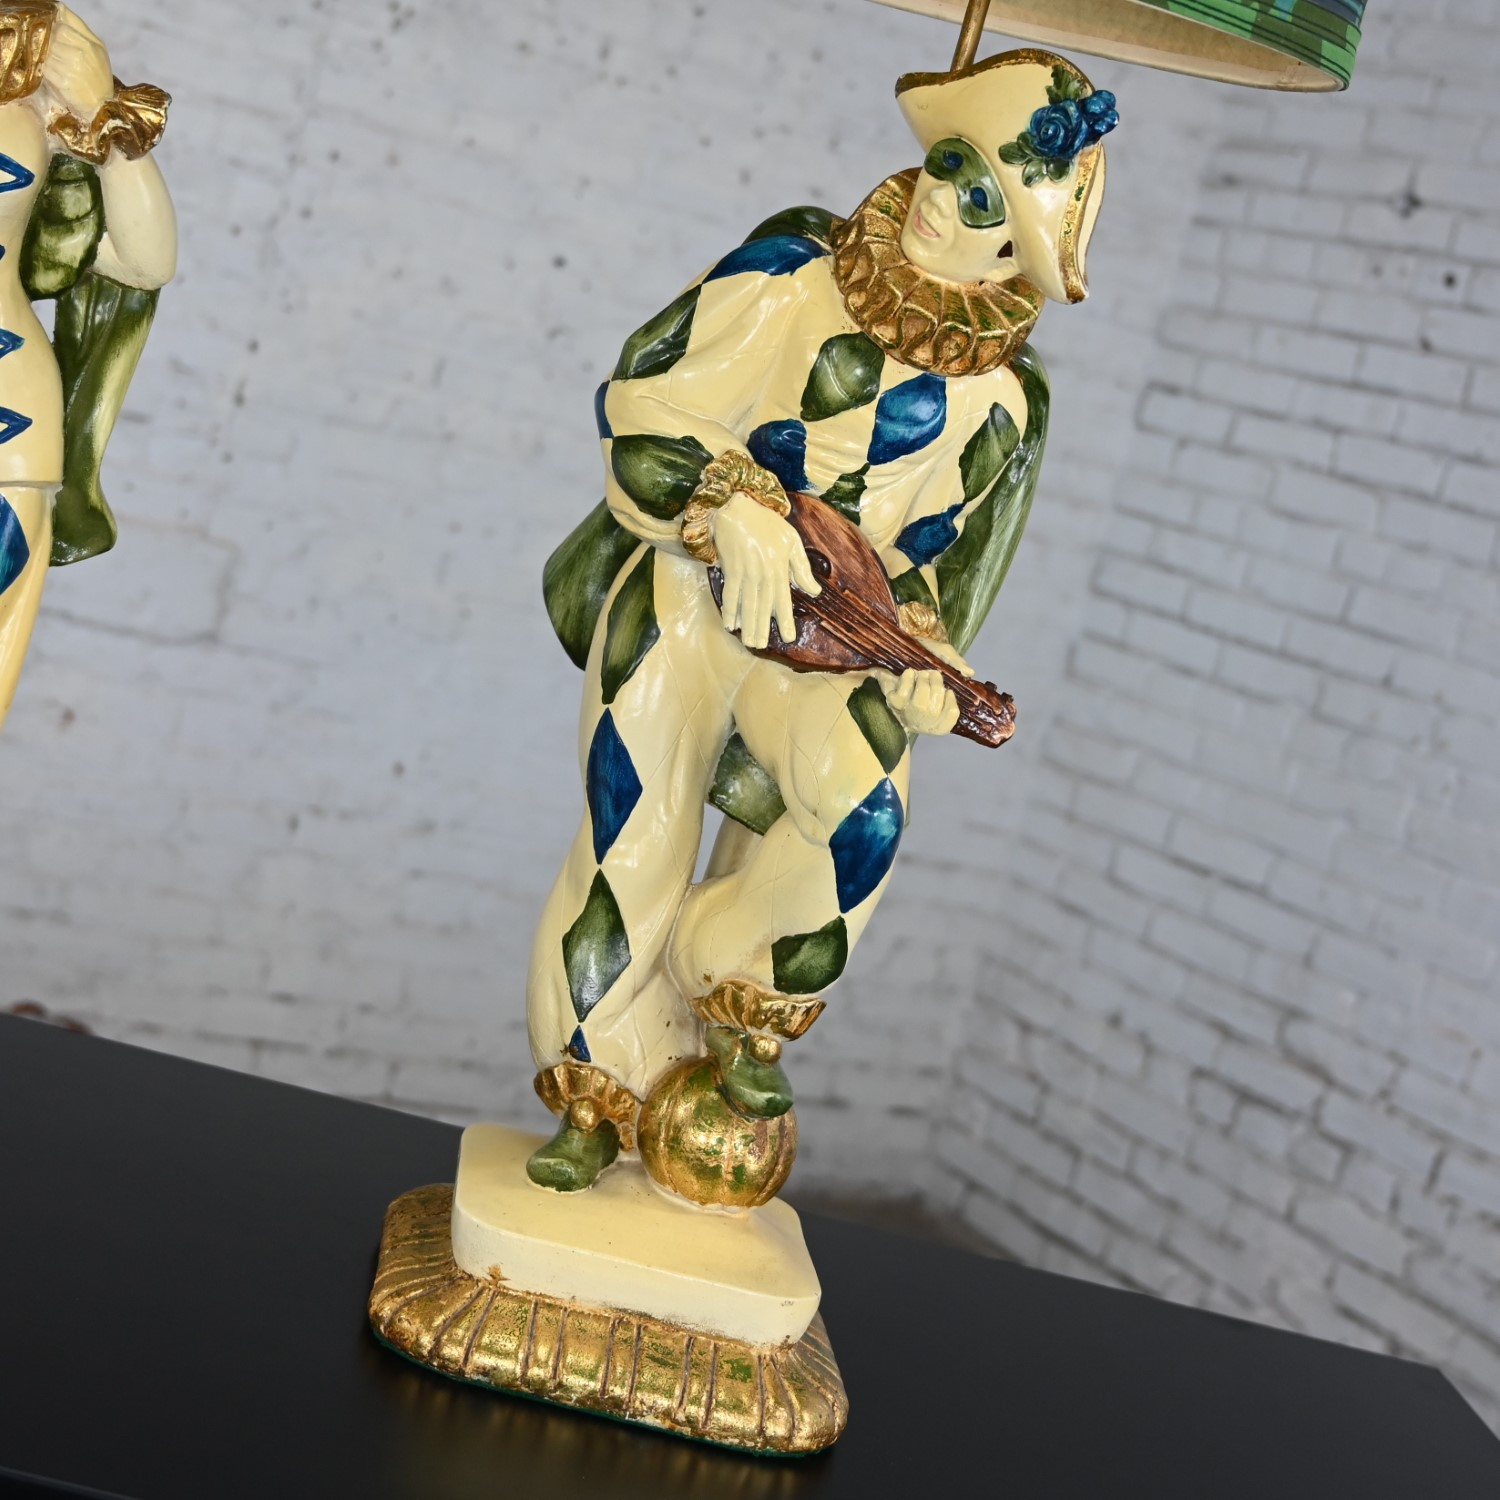 Mid-20th Century MCM Art Deco Figural Jester Harlequin Table Lamps Style of Marbro a Pair in Blue & Green